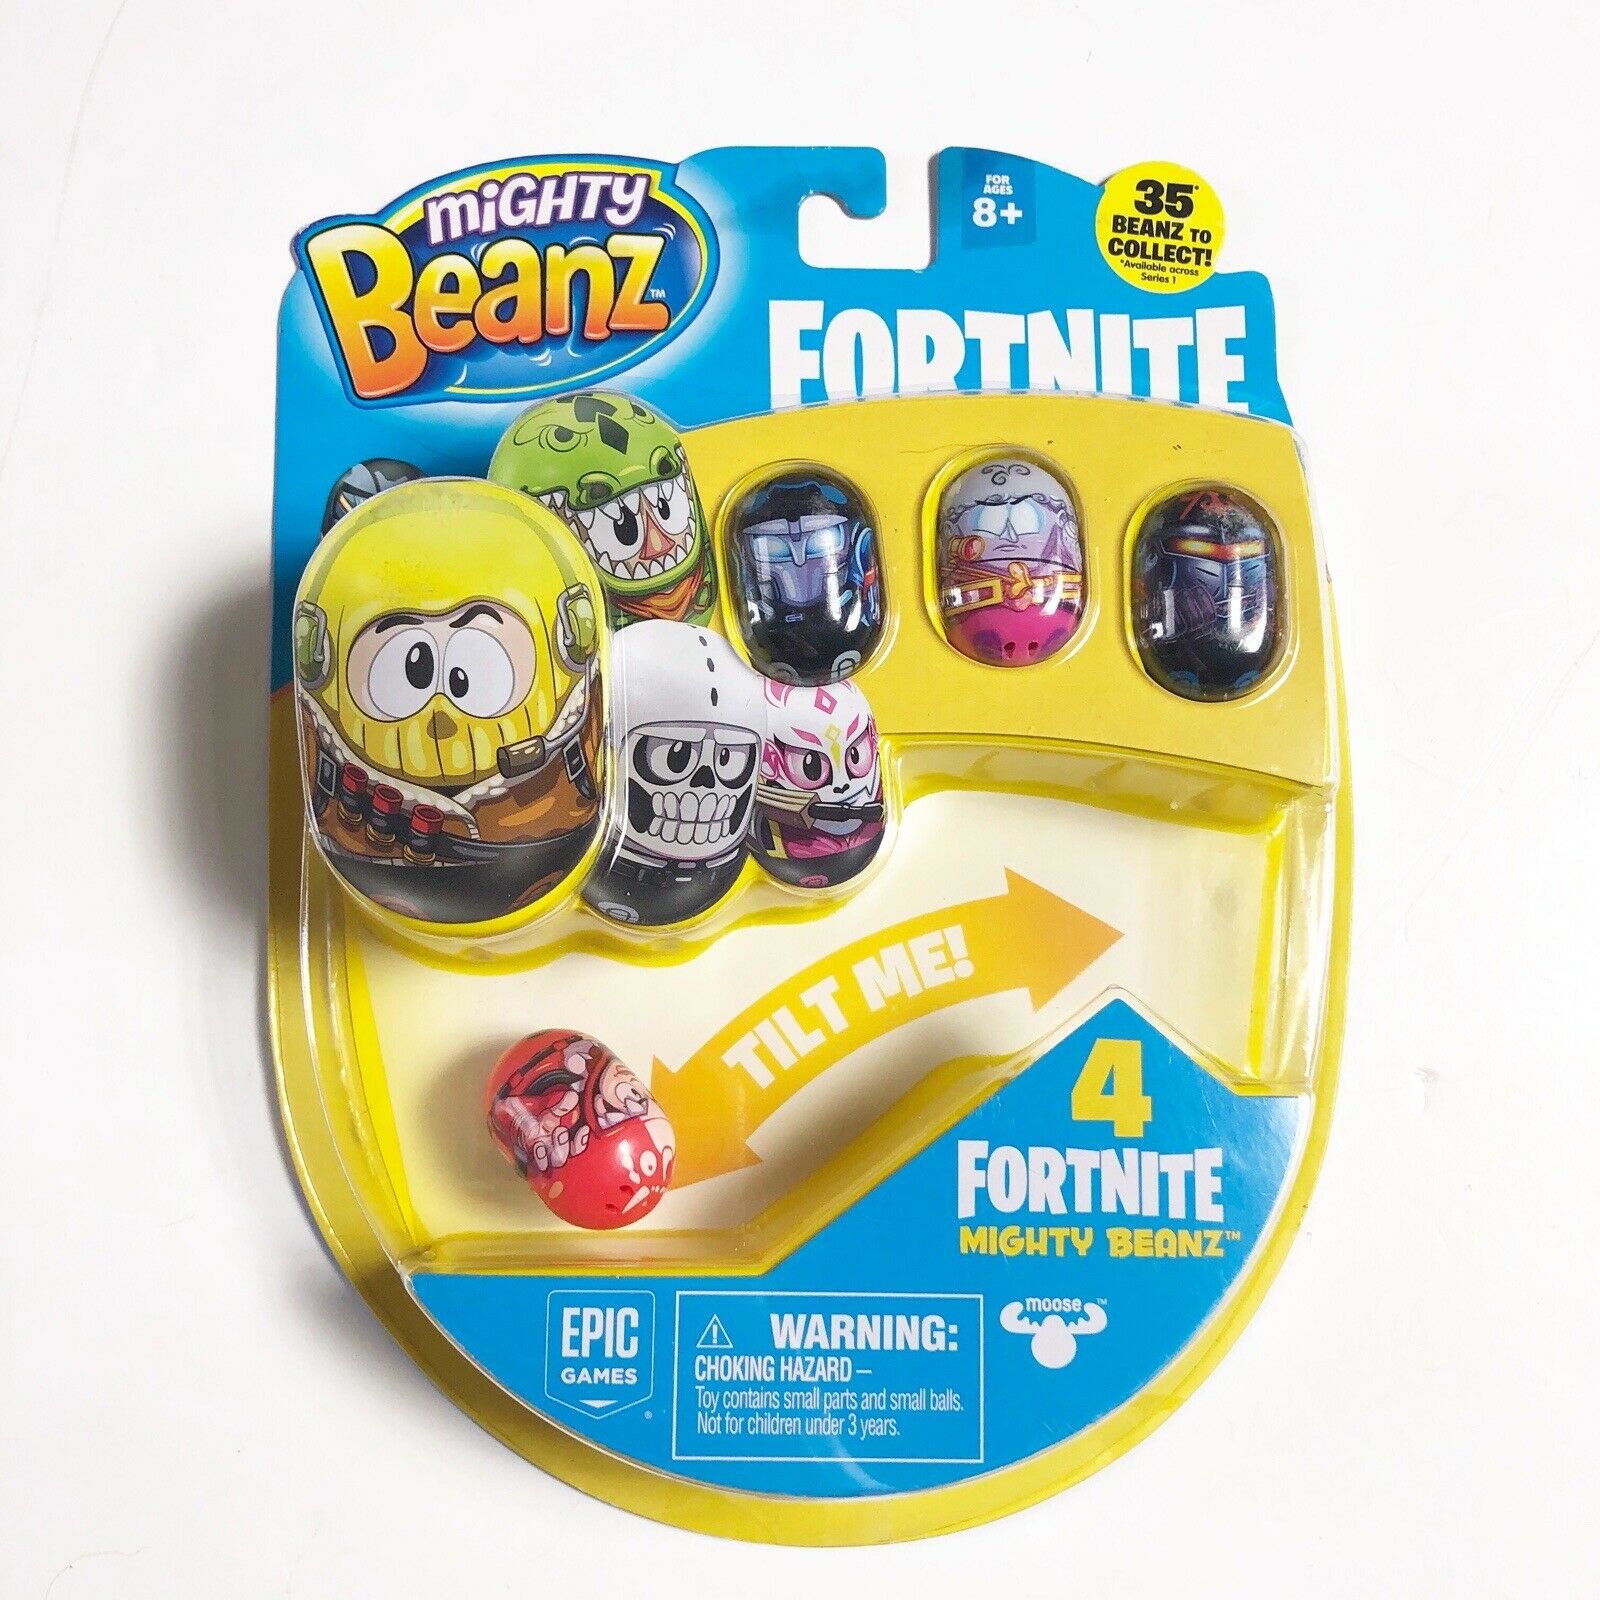 Epic Games Fortnite Mighty Beanz 4 Pack 2018 Moose Toys Series 1 New Beans